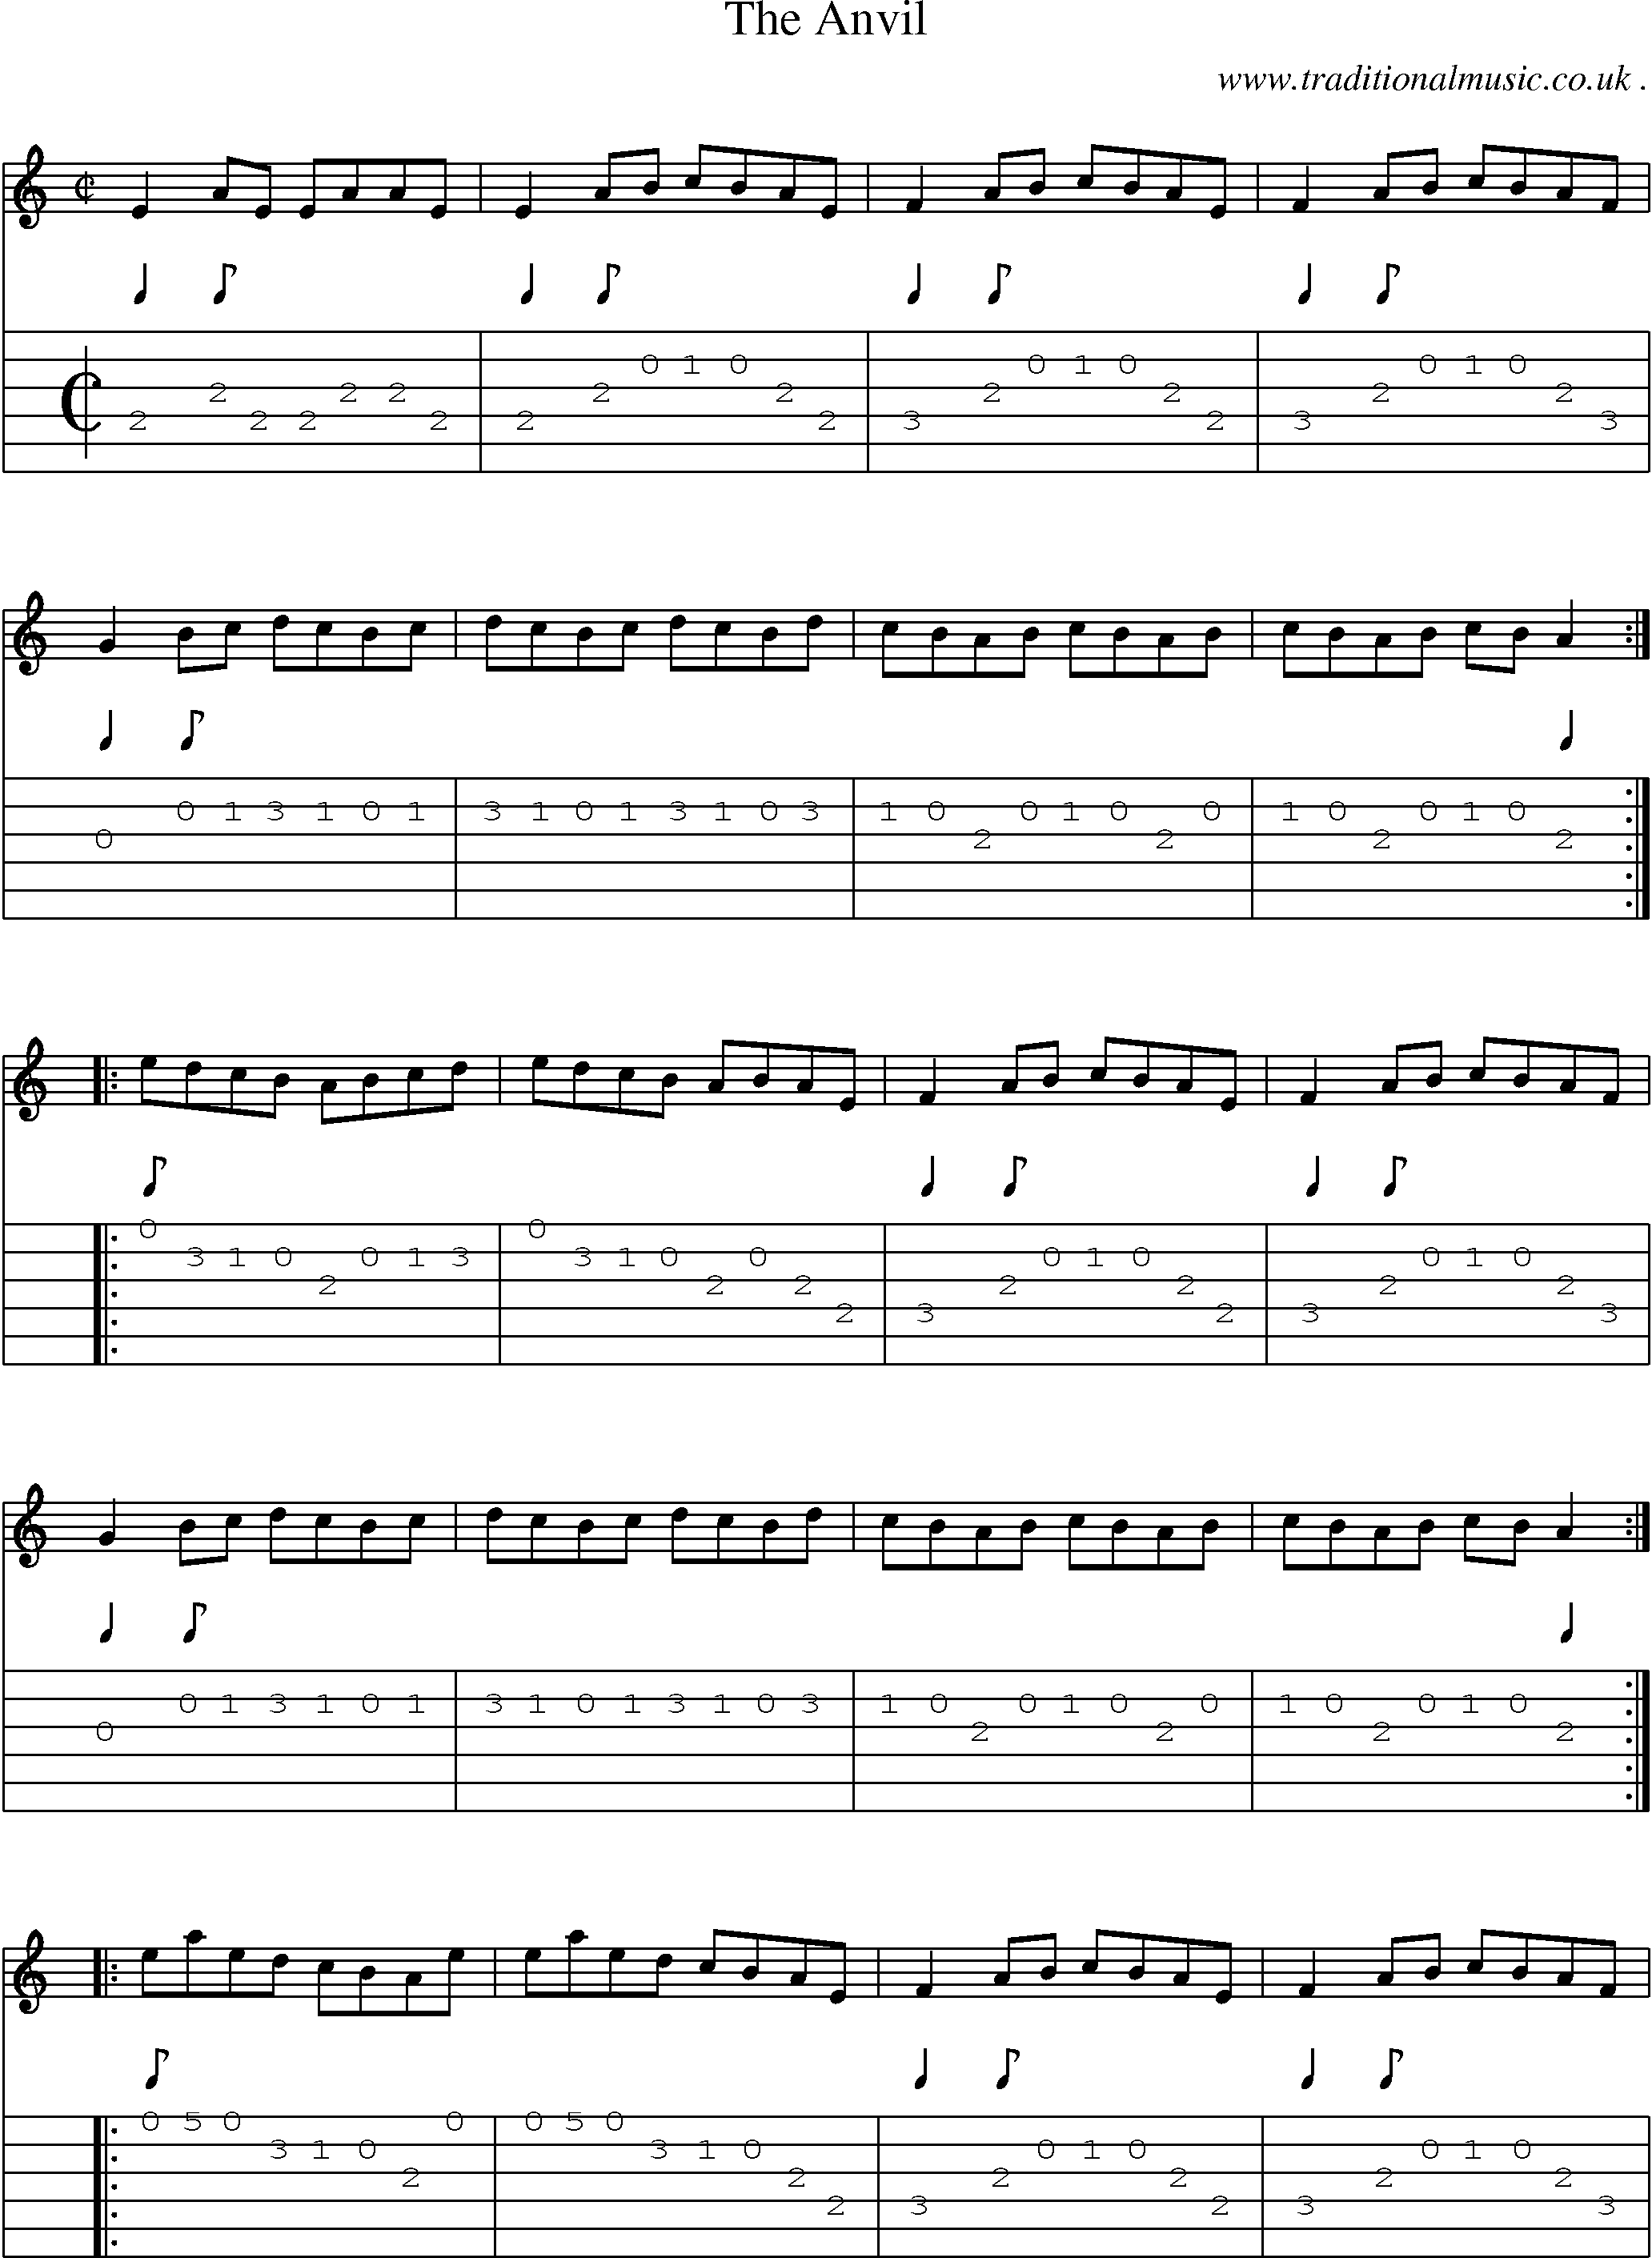 Sheet-Music and Guitar Tabs for The Anvil